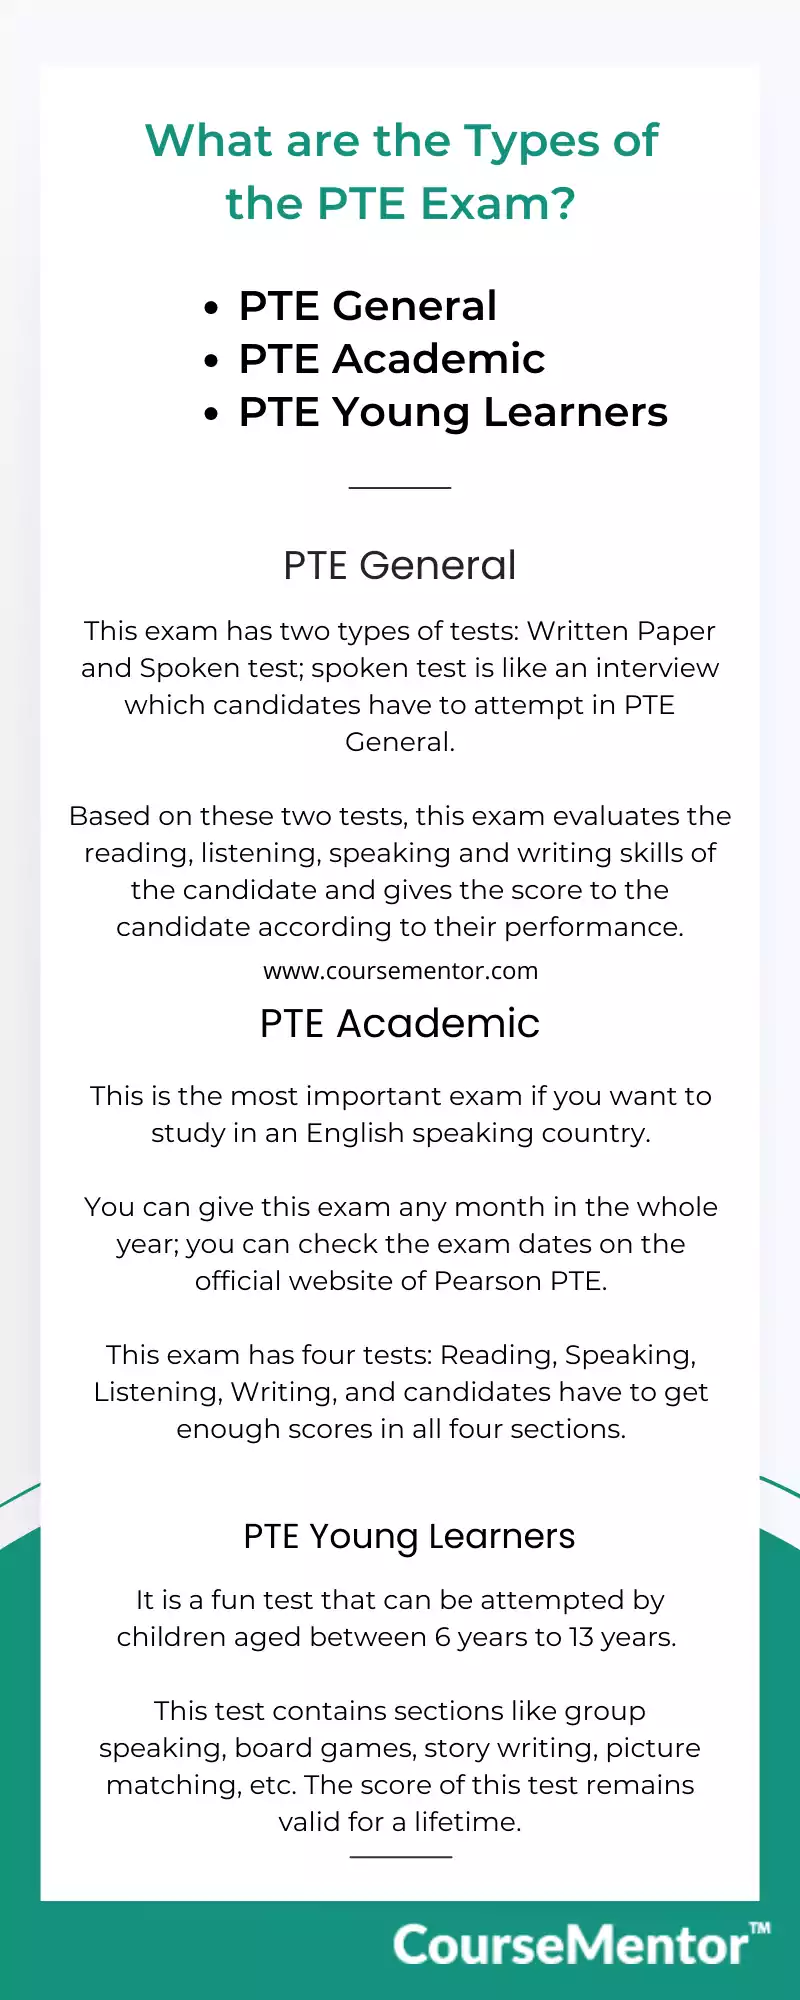 What are the Types of the PTE Exam?